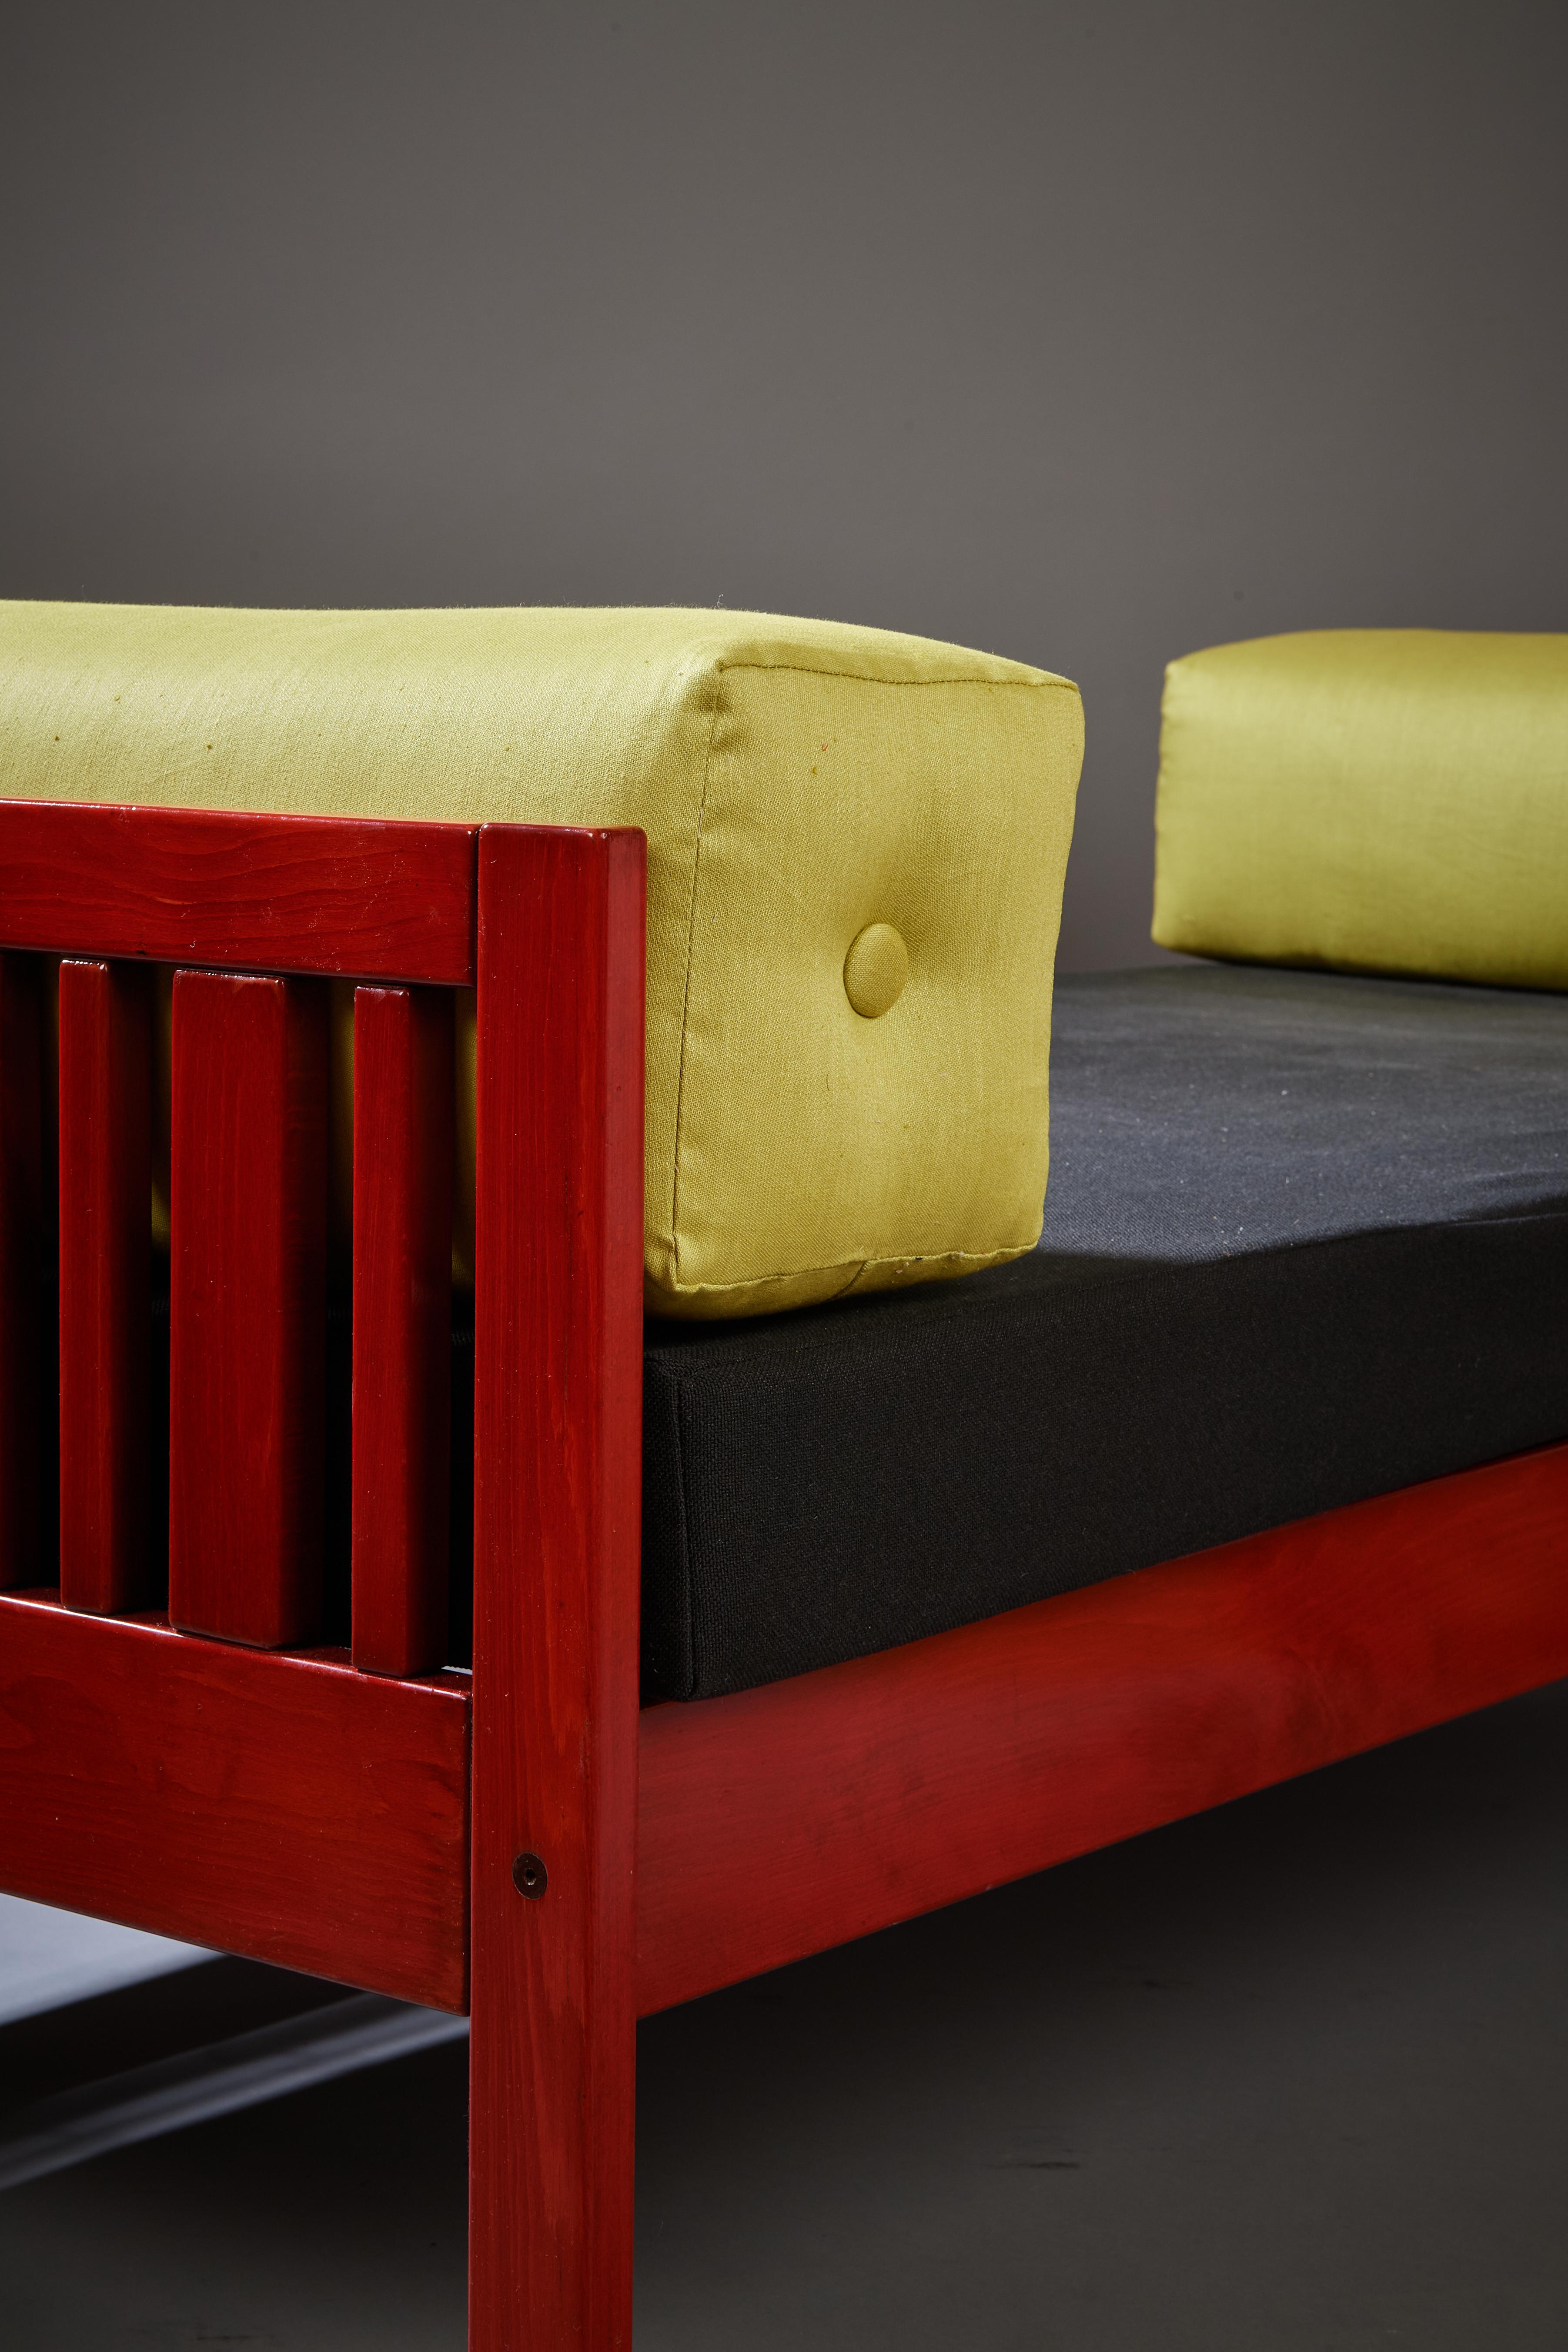 Ettore Sottsass Daybed, Red Lacquered Wood, Chartreuse Upholstery, Italy c. 1962 For Sale 5